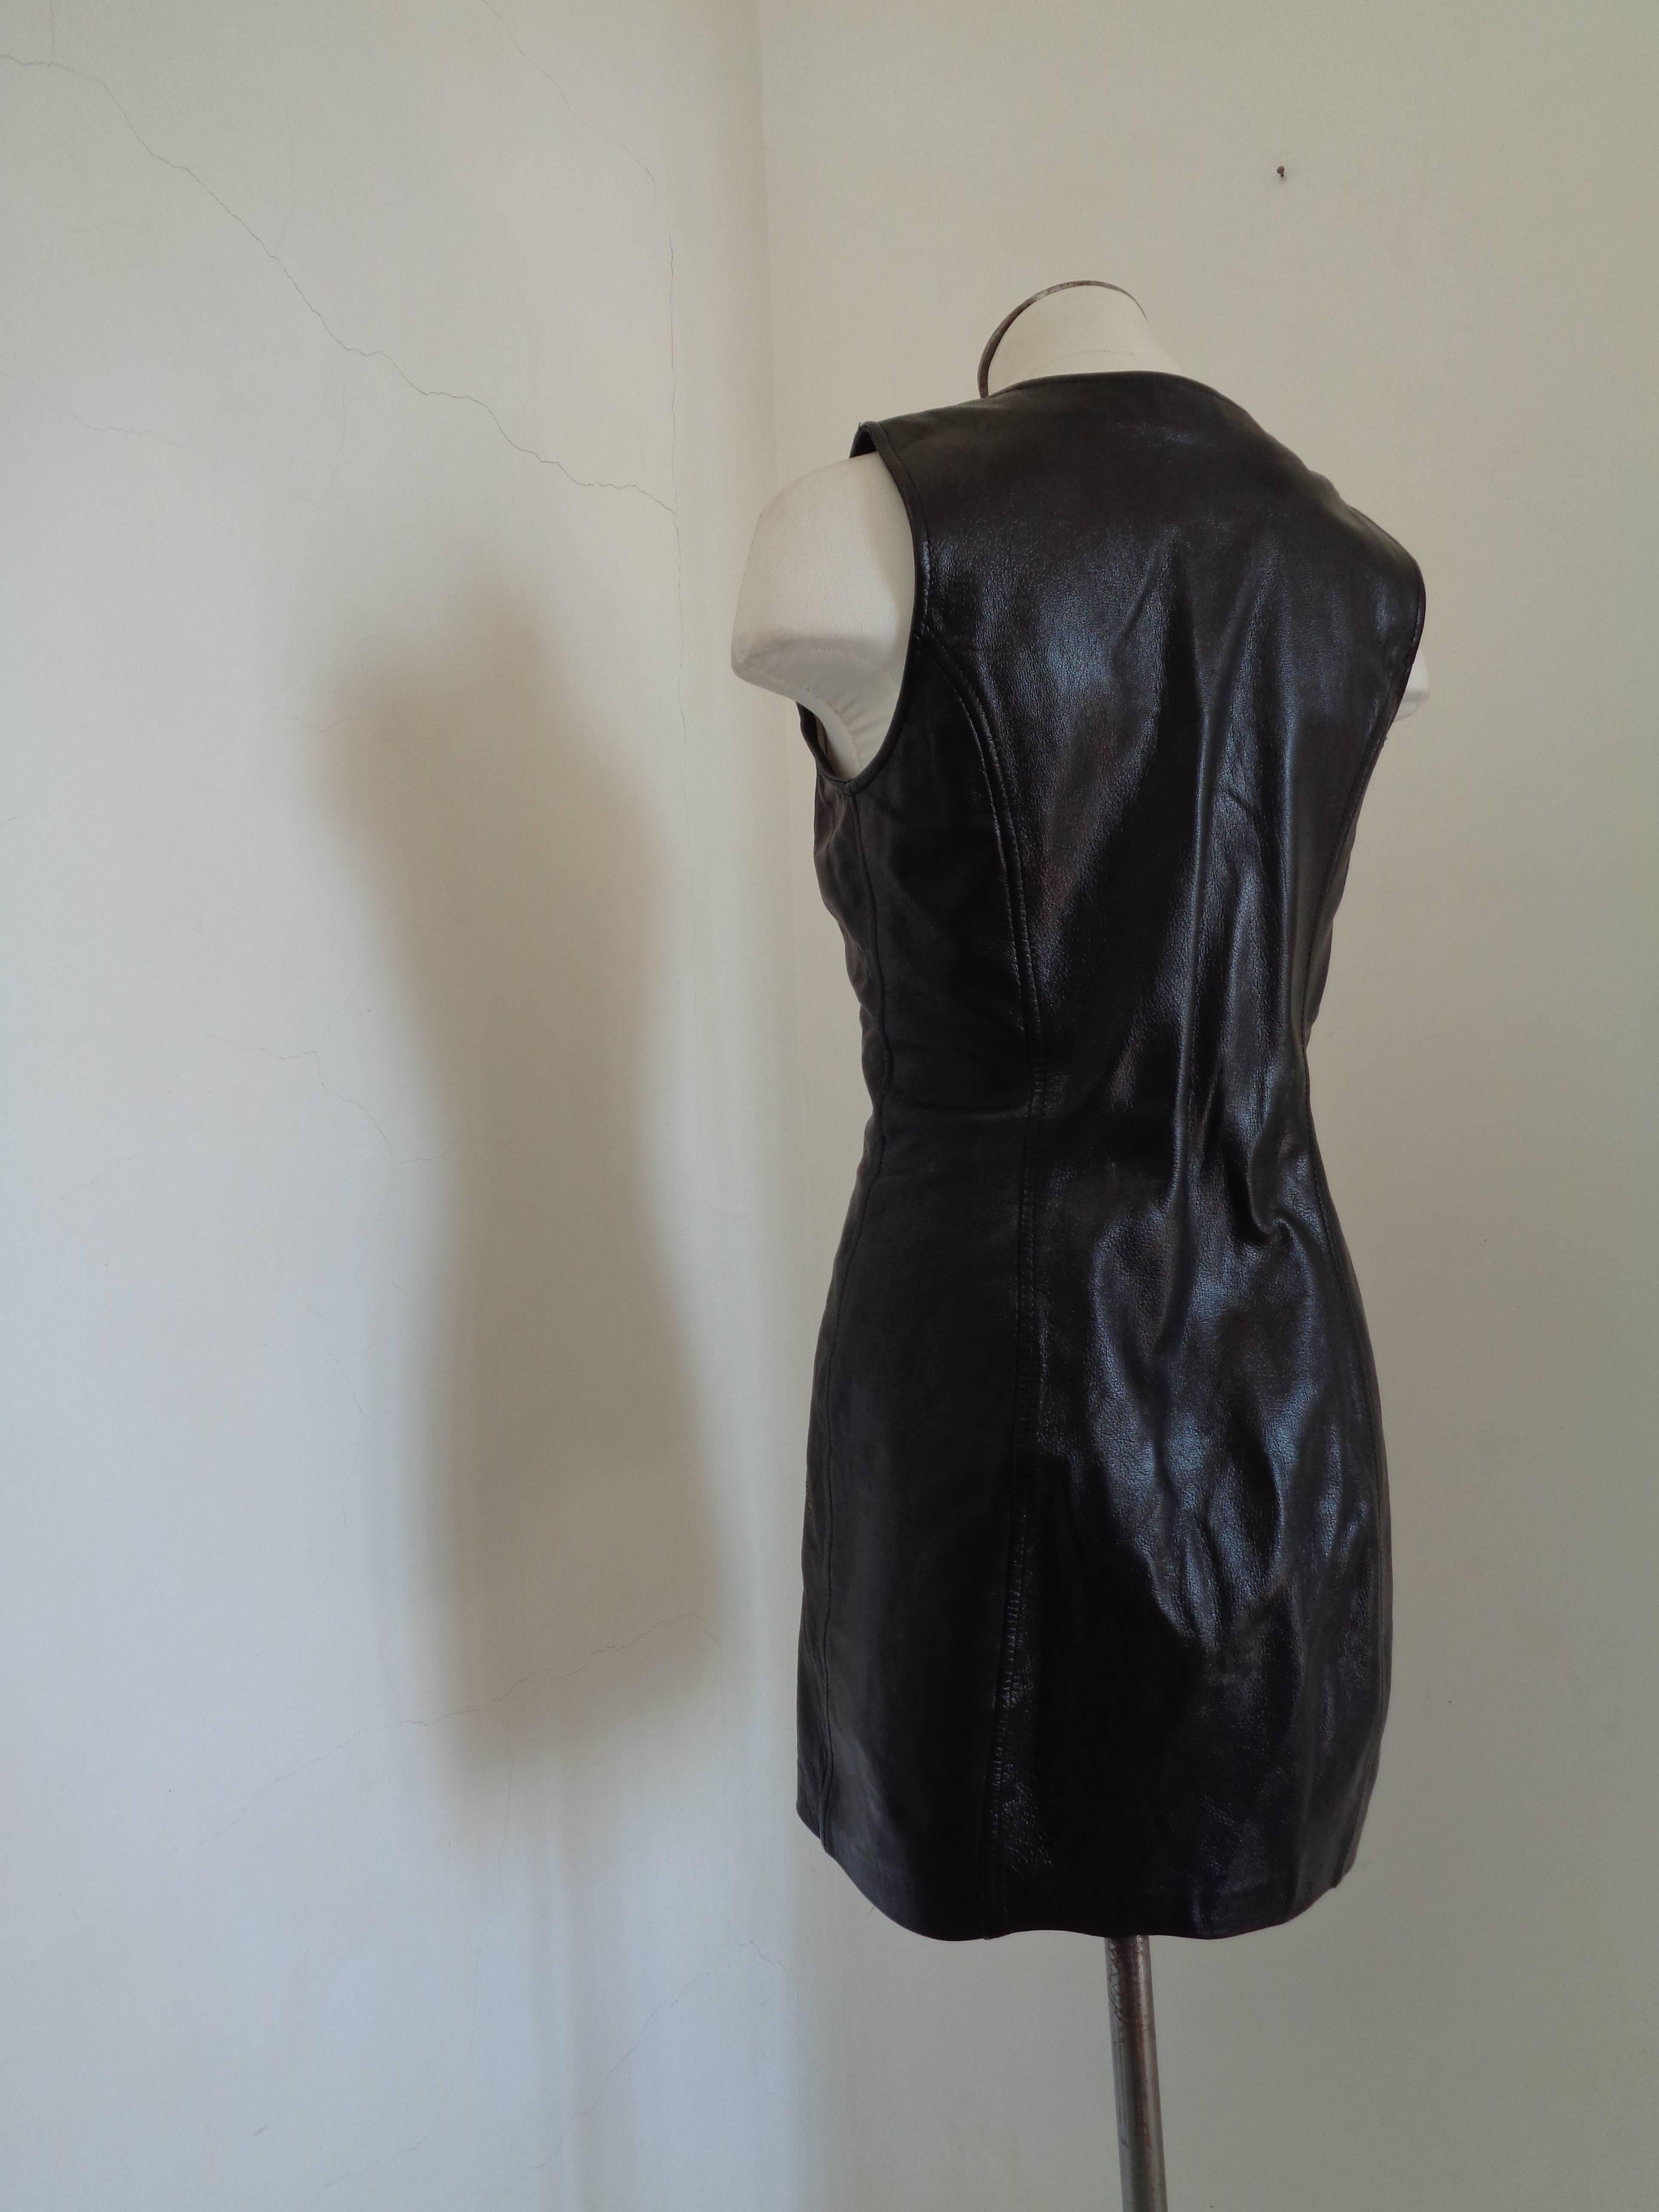 Moschino Cheap & Chic Black Leather Dress In Good Condition For Sale In Capri, IT